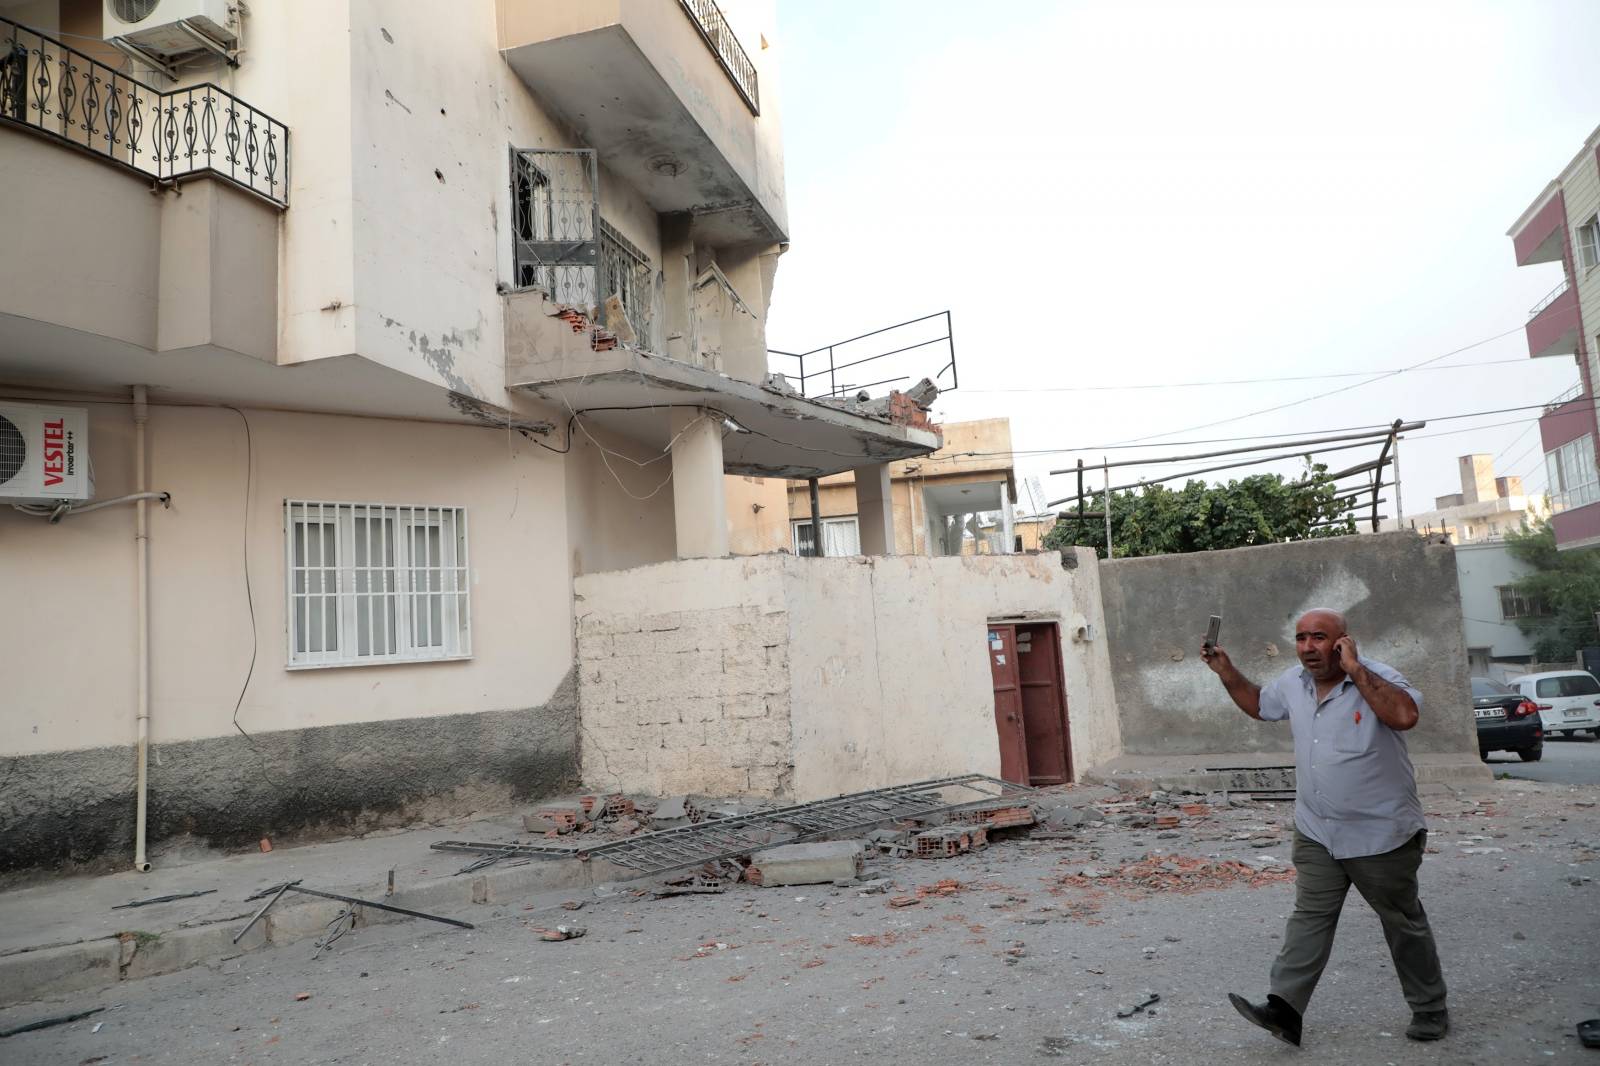 A man reacts after an apartment building hit by a rocket fired from Syria, in Nusaybin